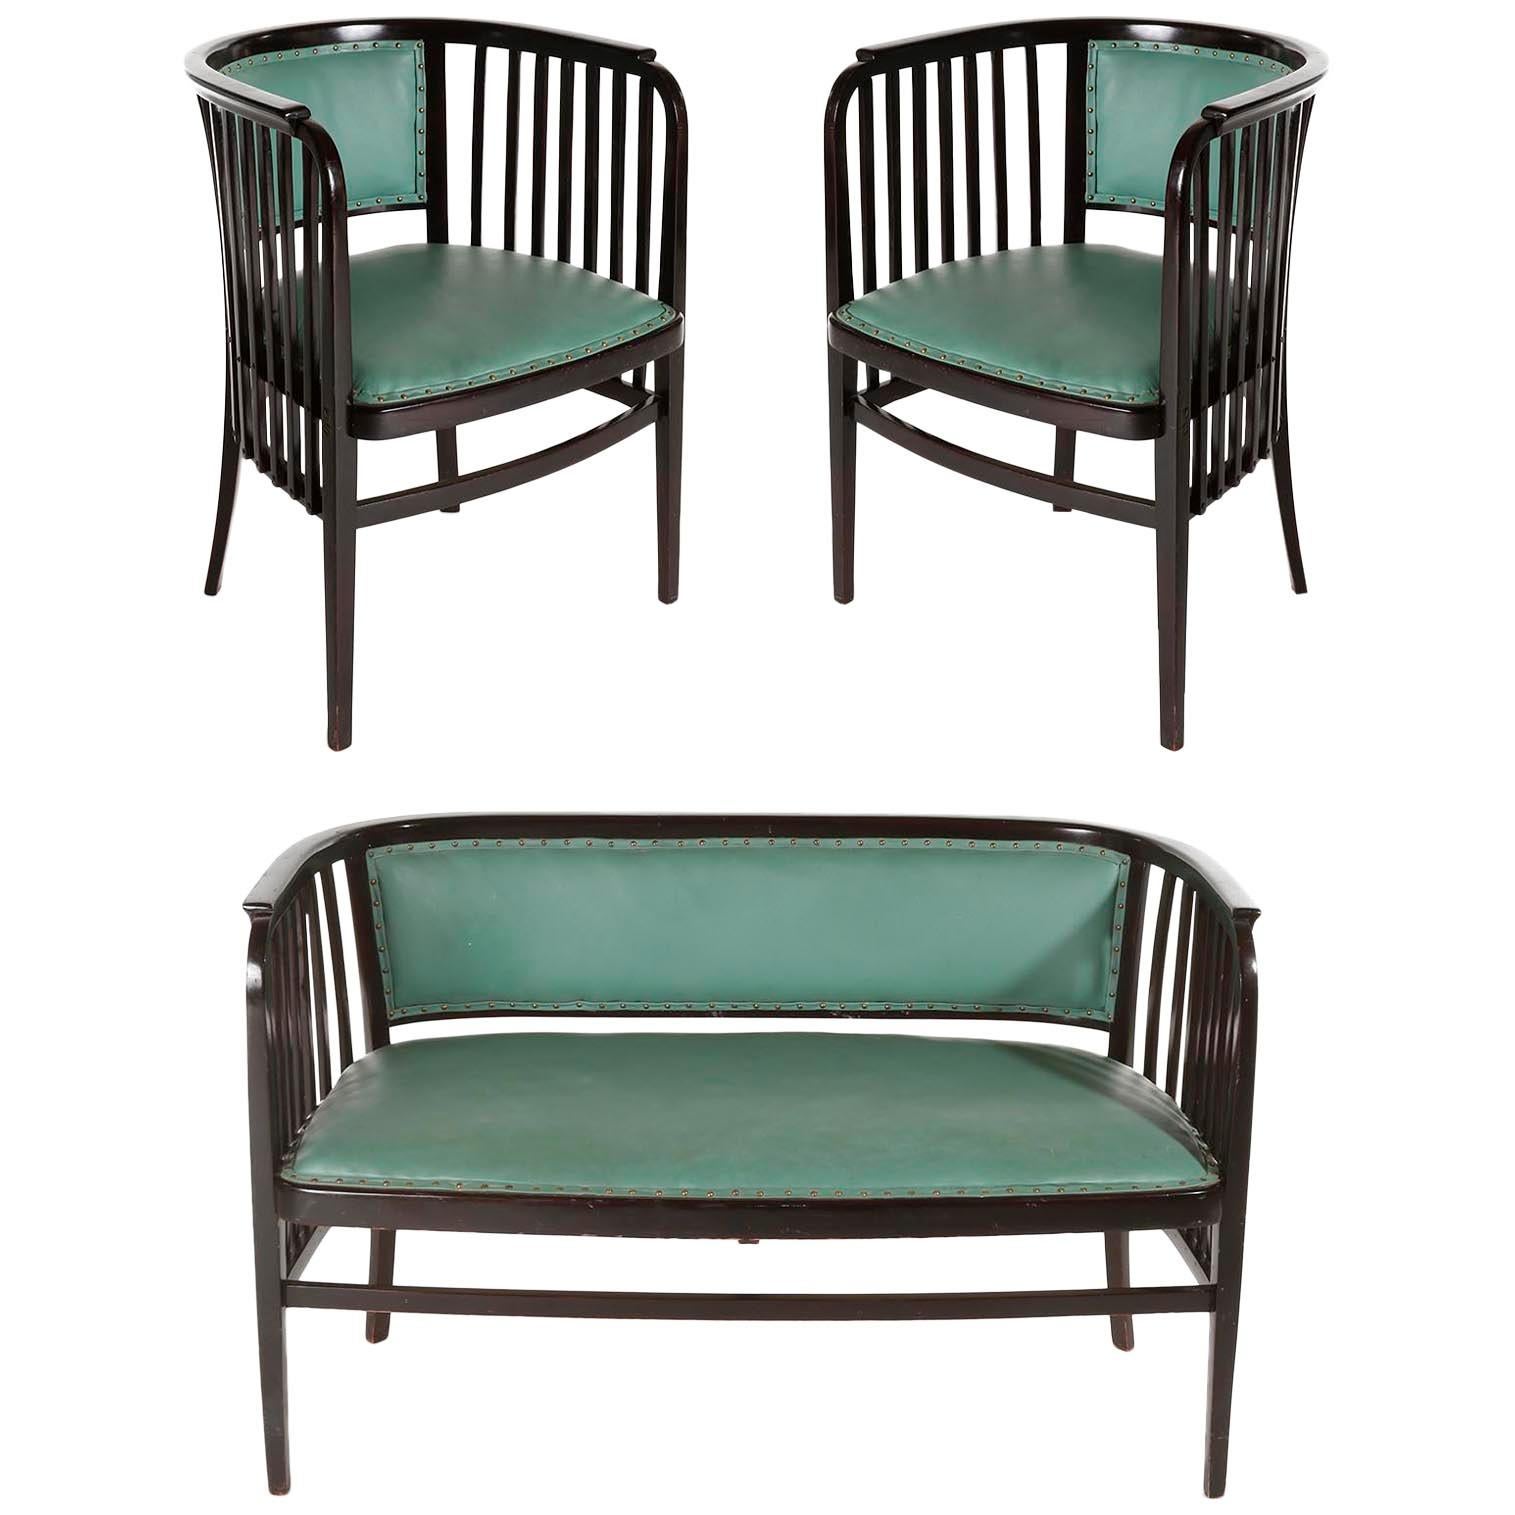 Austrian Pair of Armchairs Chairs Marcel Kammerer, Thonet, Turquoise Green Leather, 1910 For Sale